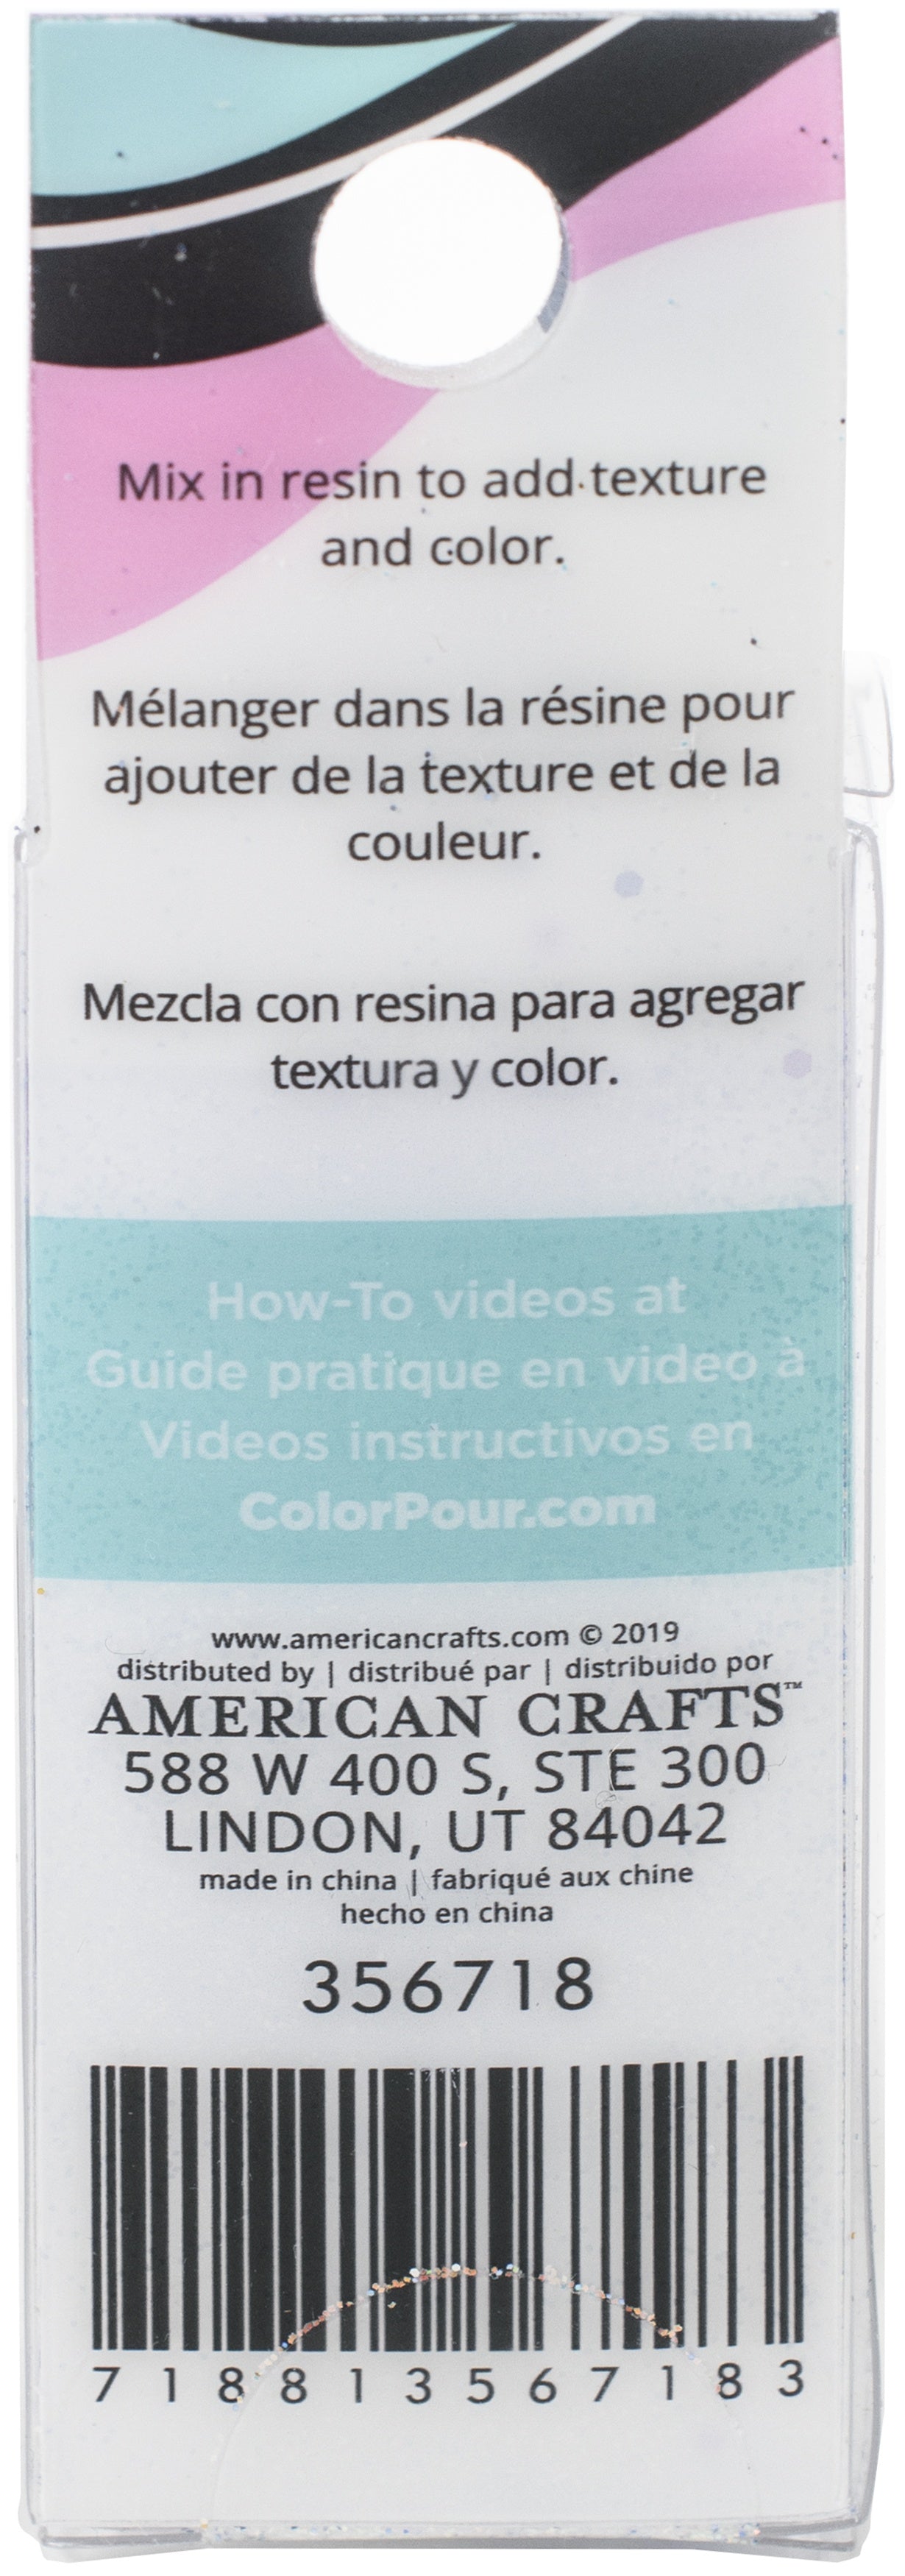 American Crafts Color Pour Resin Mix-Ins-GEODE-VIOLET, BLACK, IRIDESCENT, TURQUOI